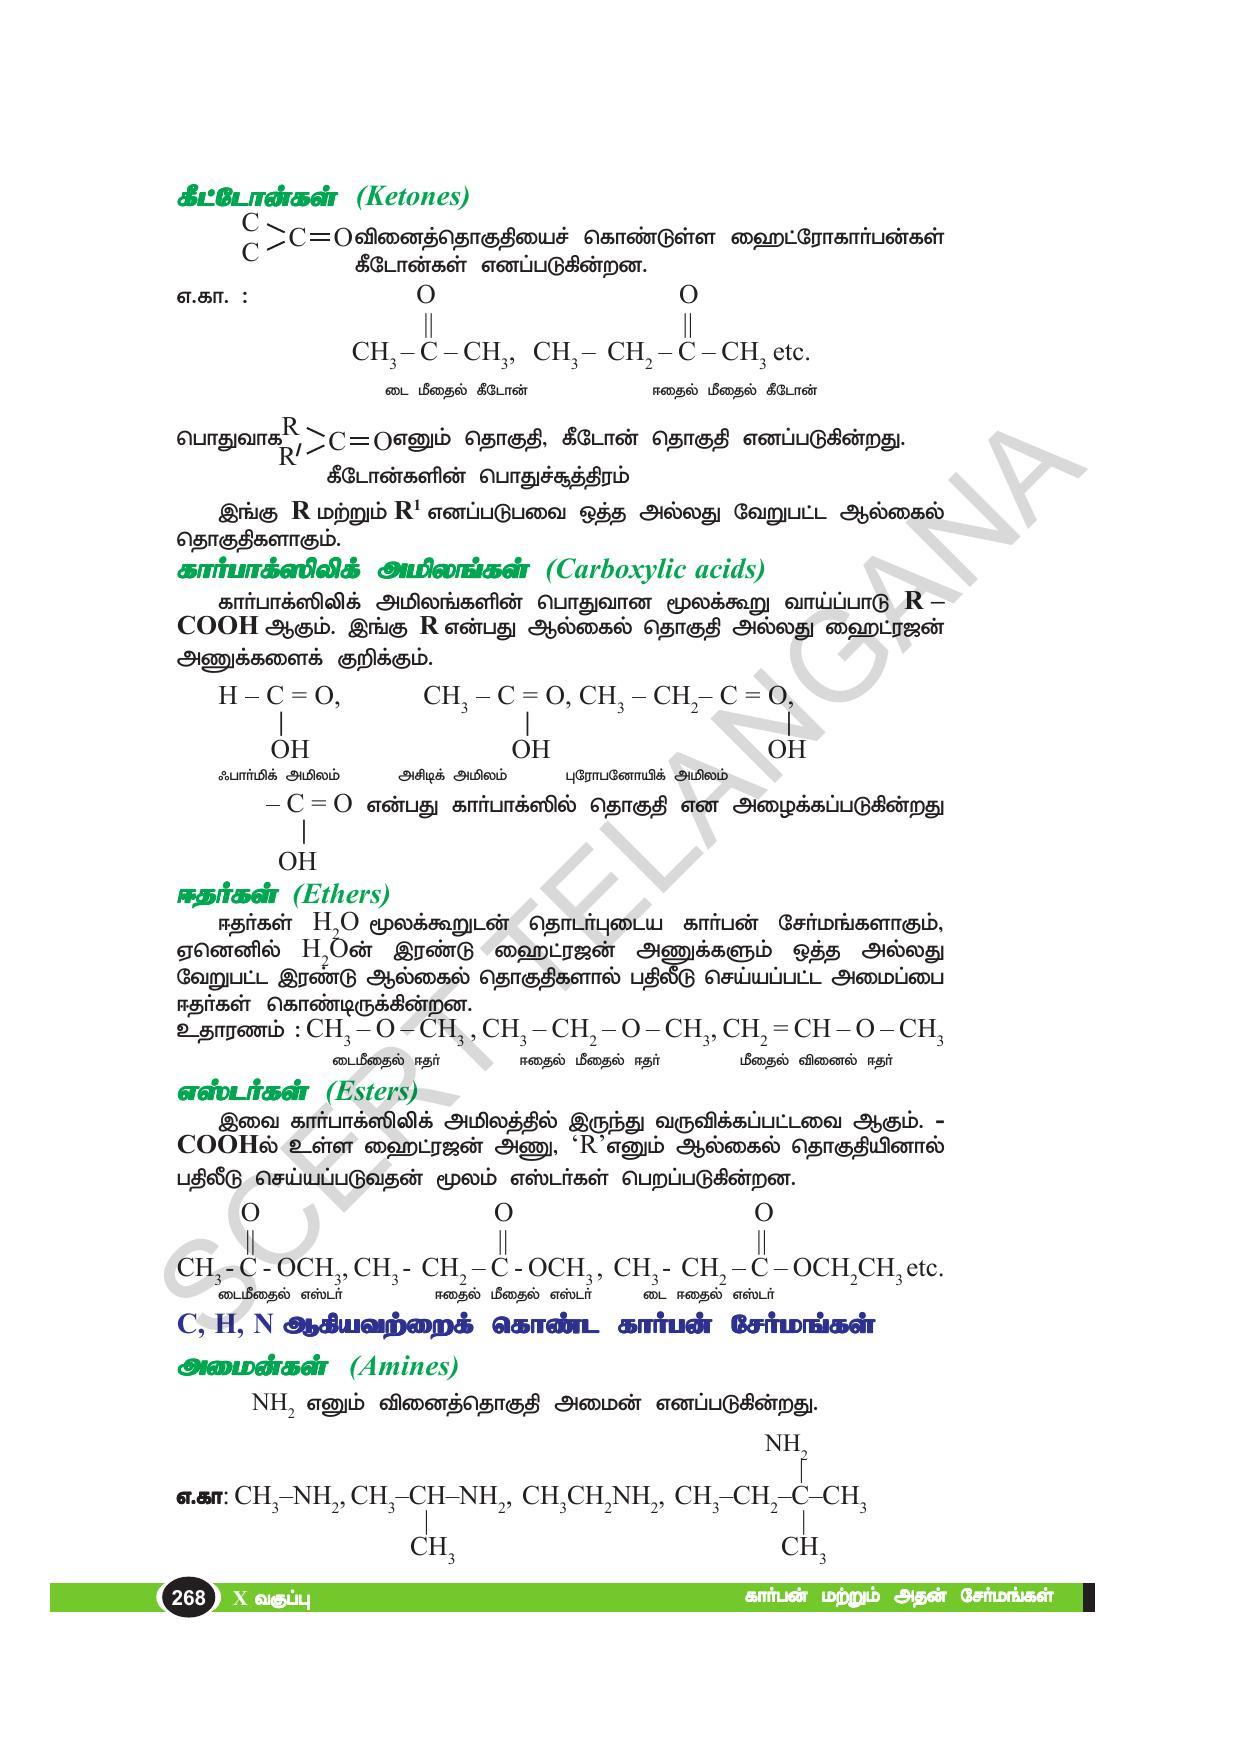 TS SCERT Class 10 Physical Science(Tamil Medium) Text Book - Page 280